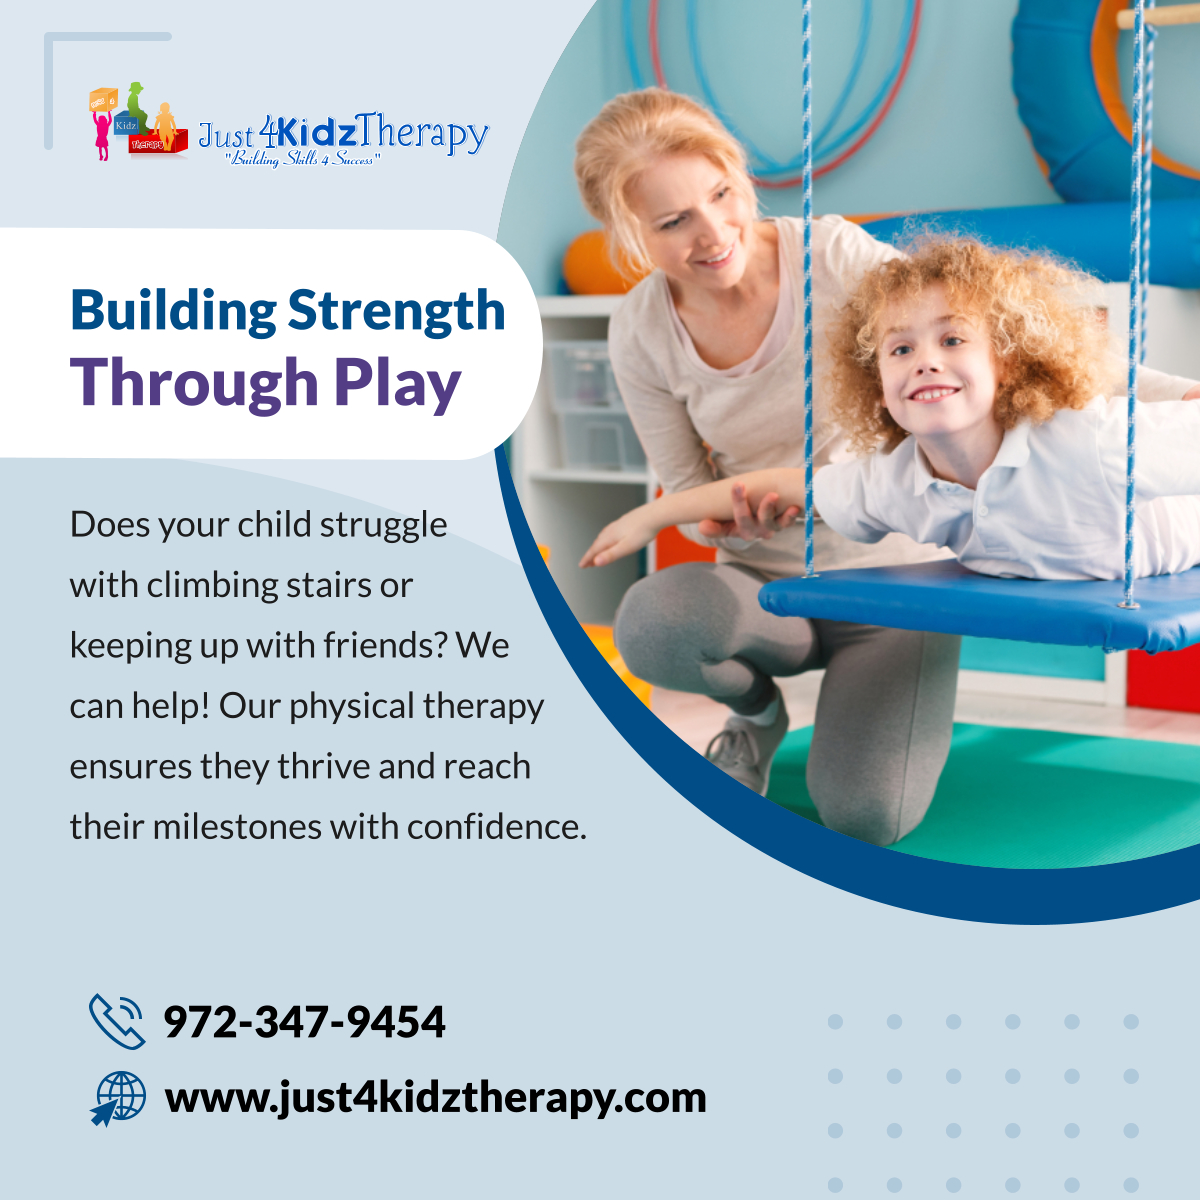 Our pediatric physical therapists use fun and engaging activities to develop gross motor skills, coordination, and balance. Schedule a consultation today and see the difference play can make! 

#CollinCountyTX #PediatricTherapyServices #StrengthThroughPlay #PhysicalTherapy